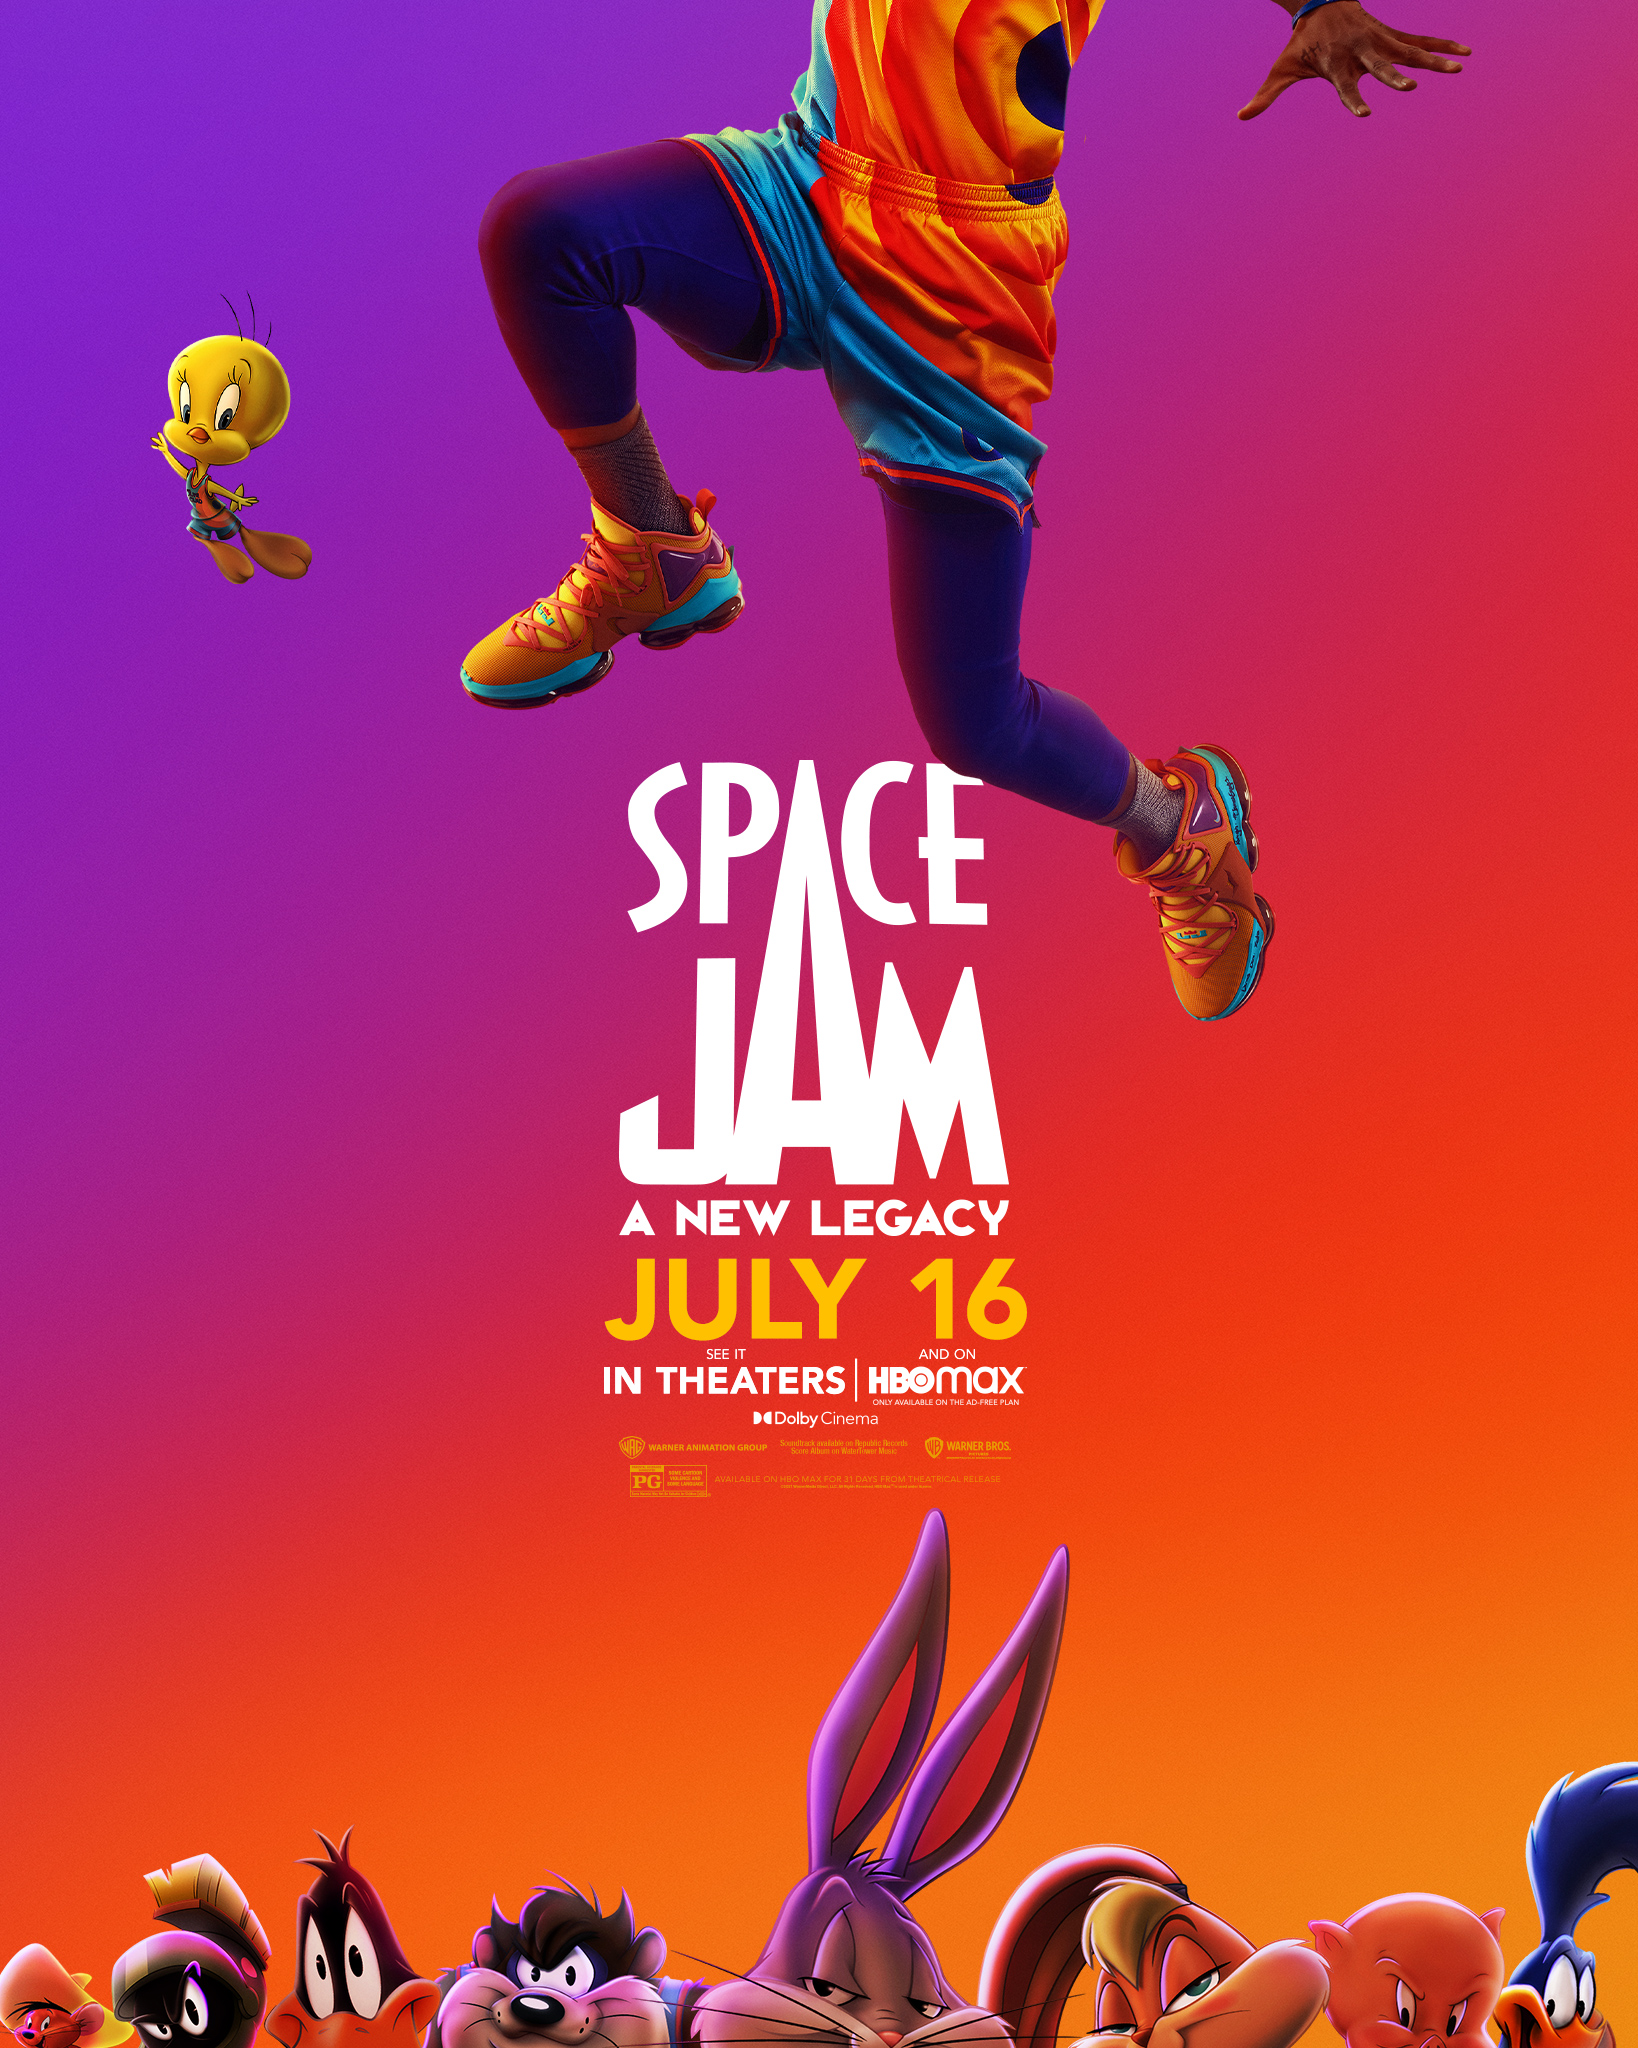 Space Jam: A New Legacy @kal_pc - Download Stickers from Sigstick